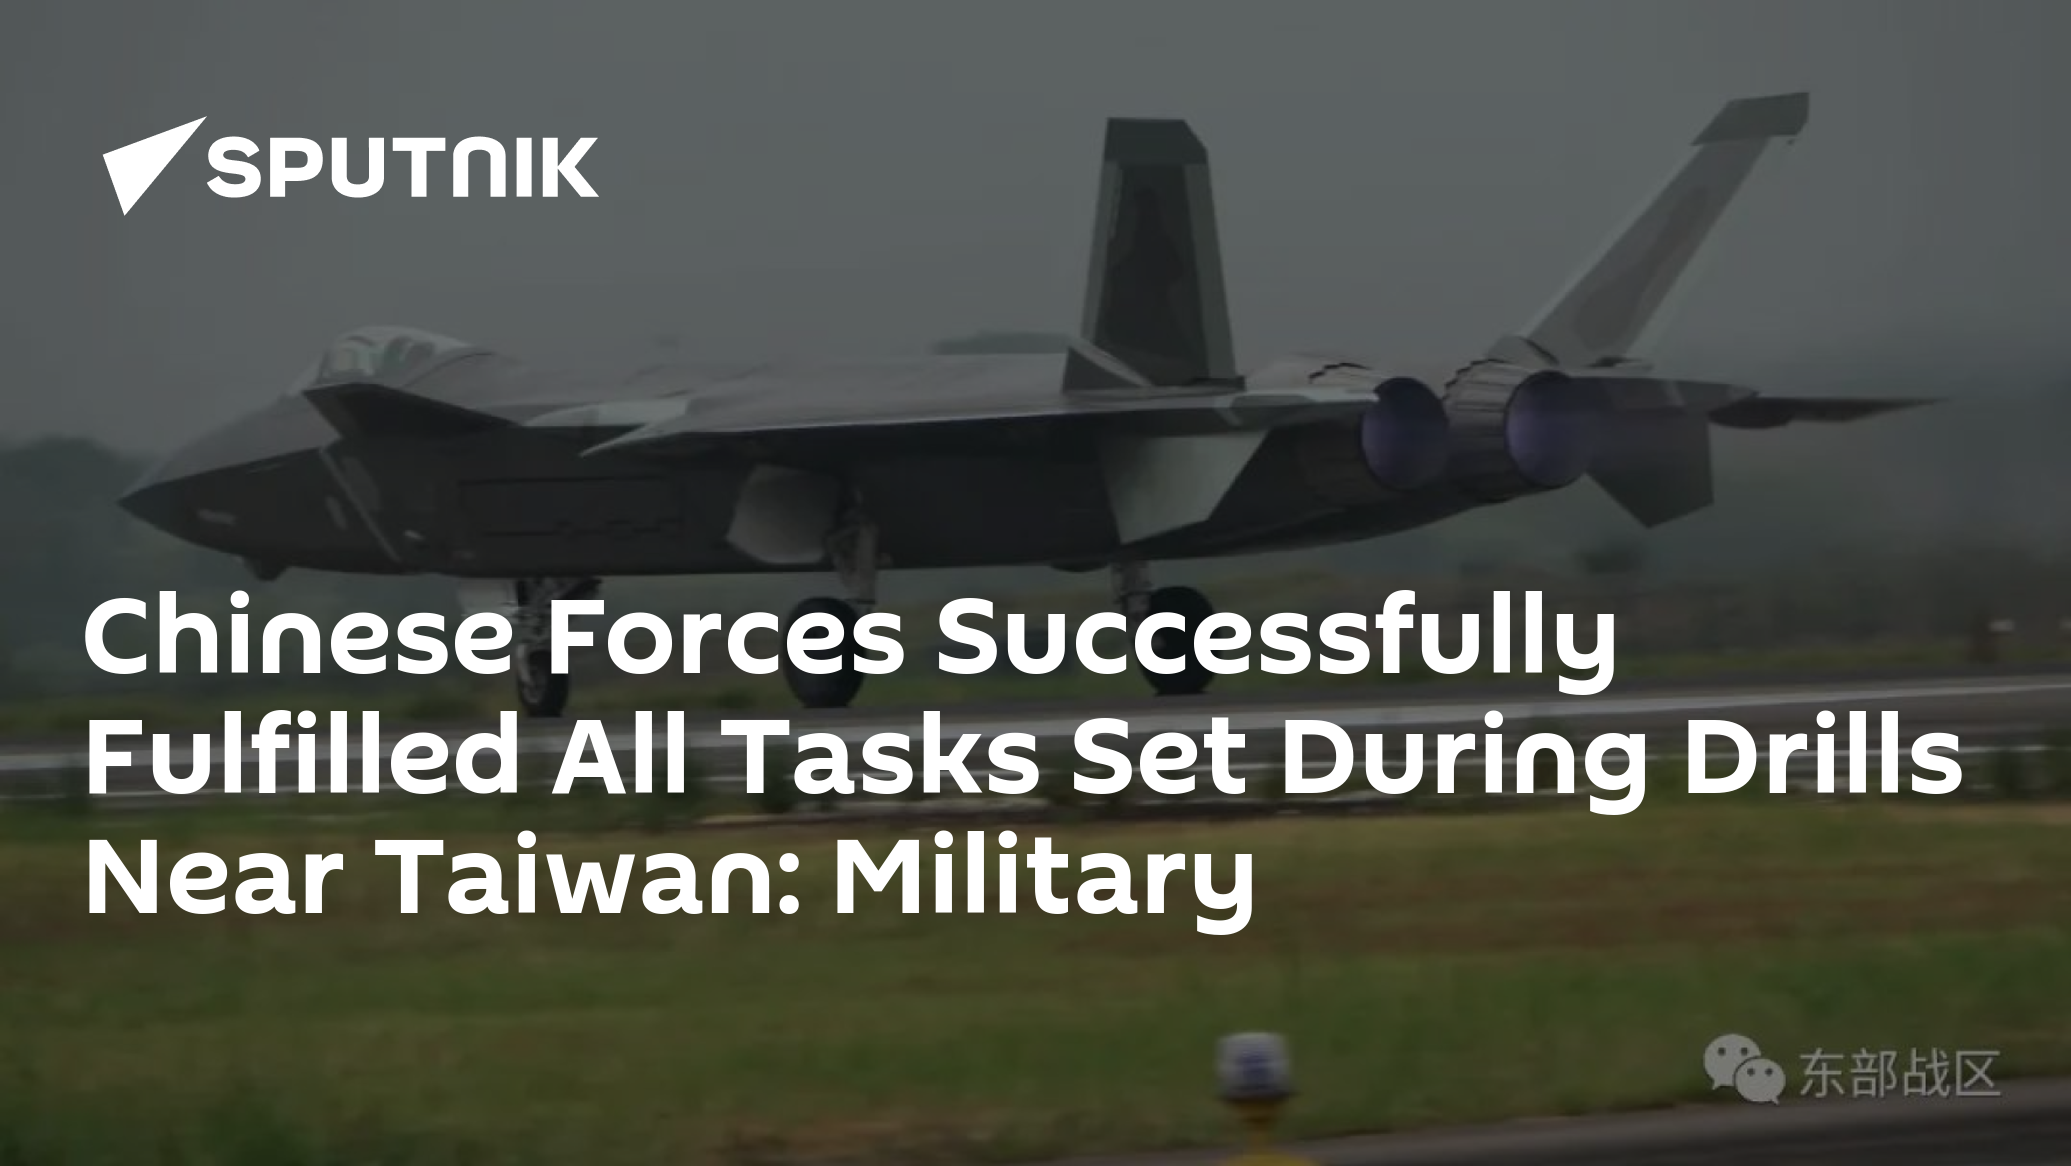 Chinese Forces Successfully Fulfilled All Tasks Set During Drills Near Taiwan: Military